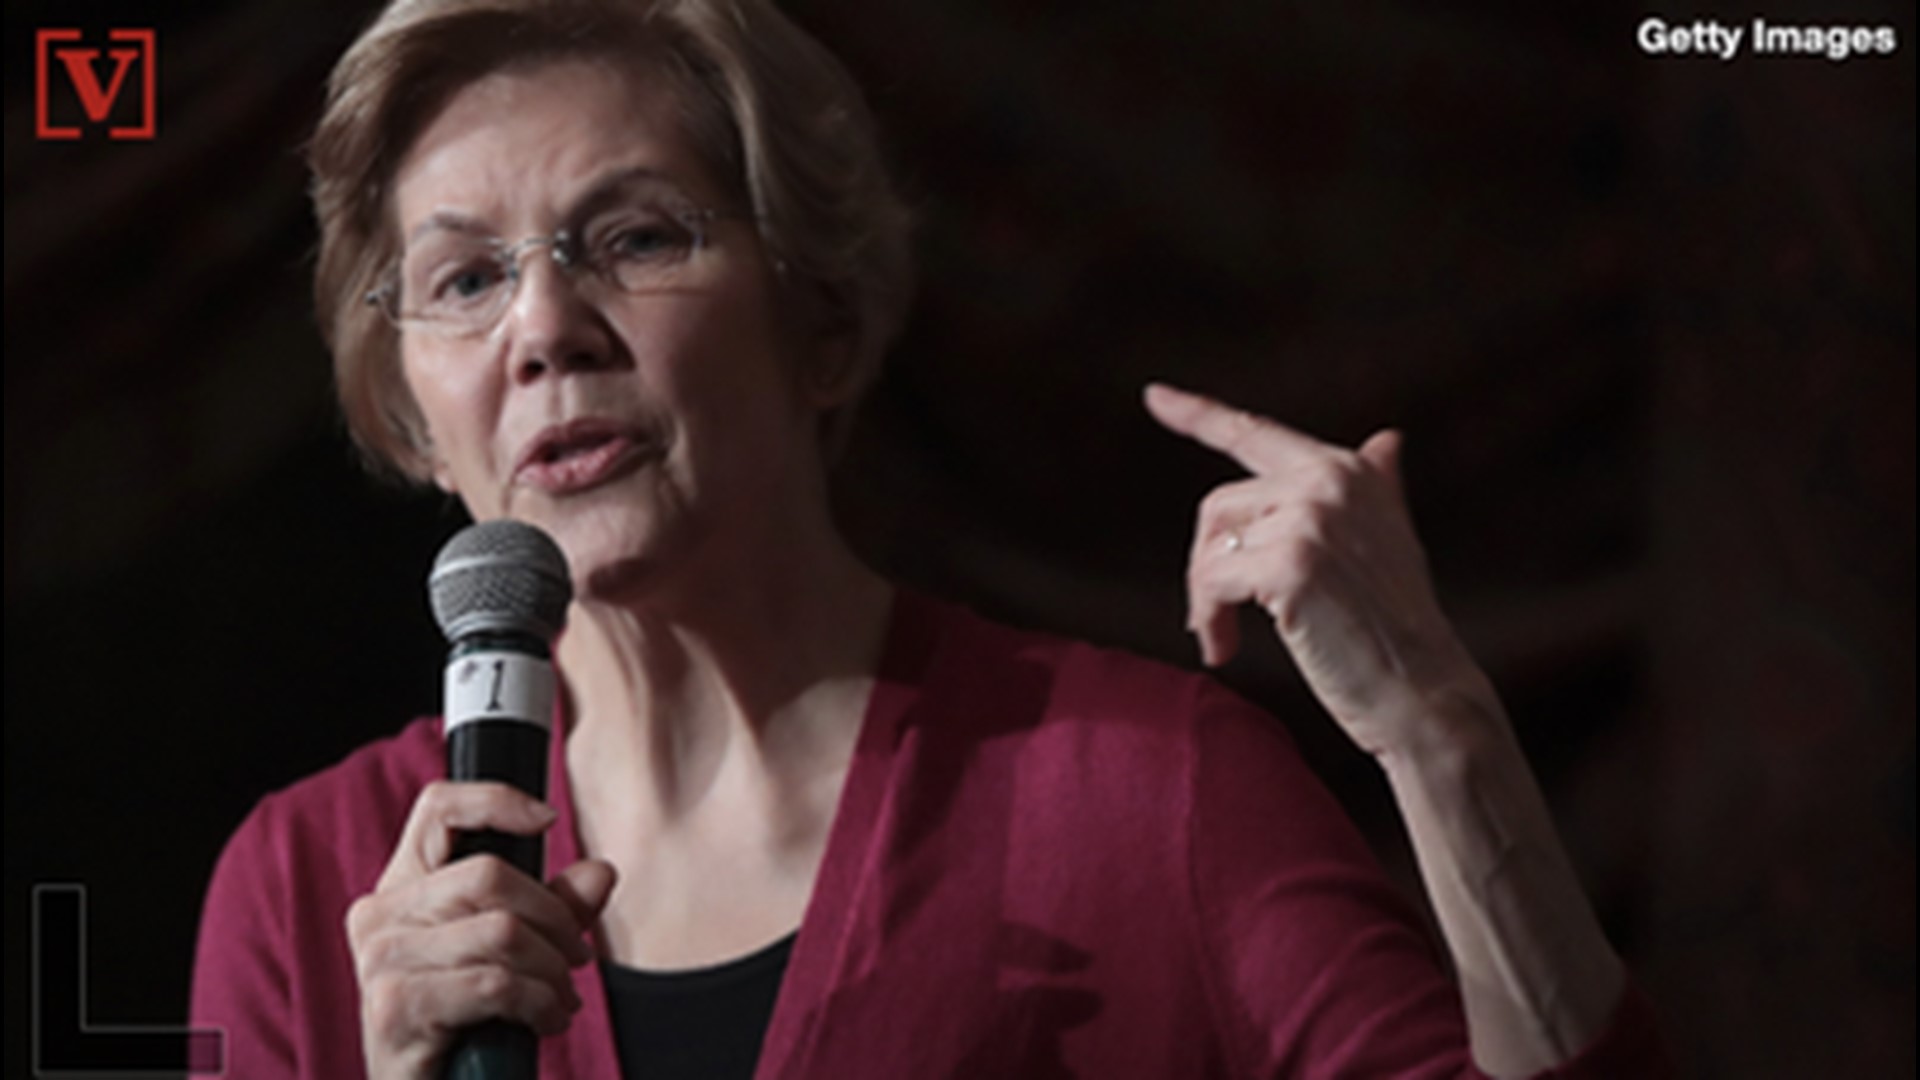 In the wake of Russia's 2016 hack of the U.S. elections, Senator Elizabeth Warren has called for updating voting polls and more in her plan for federal elections. Veuer's Justin Kircher has the story.